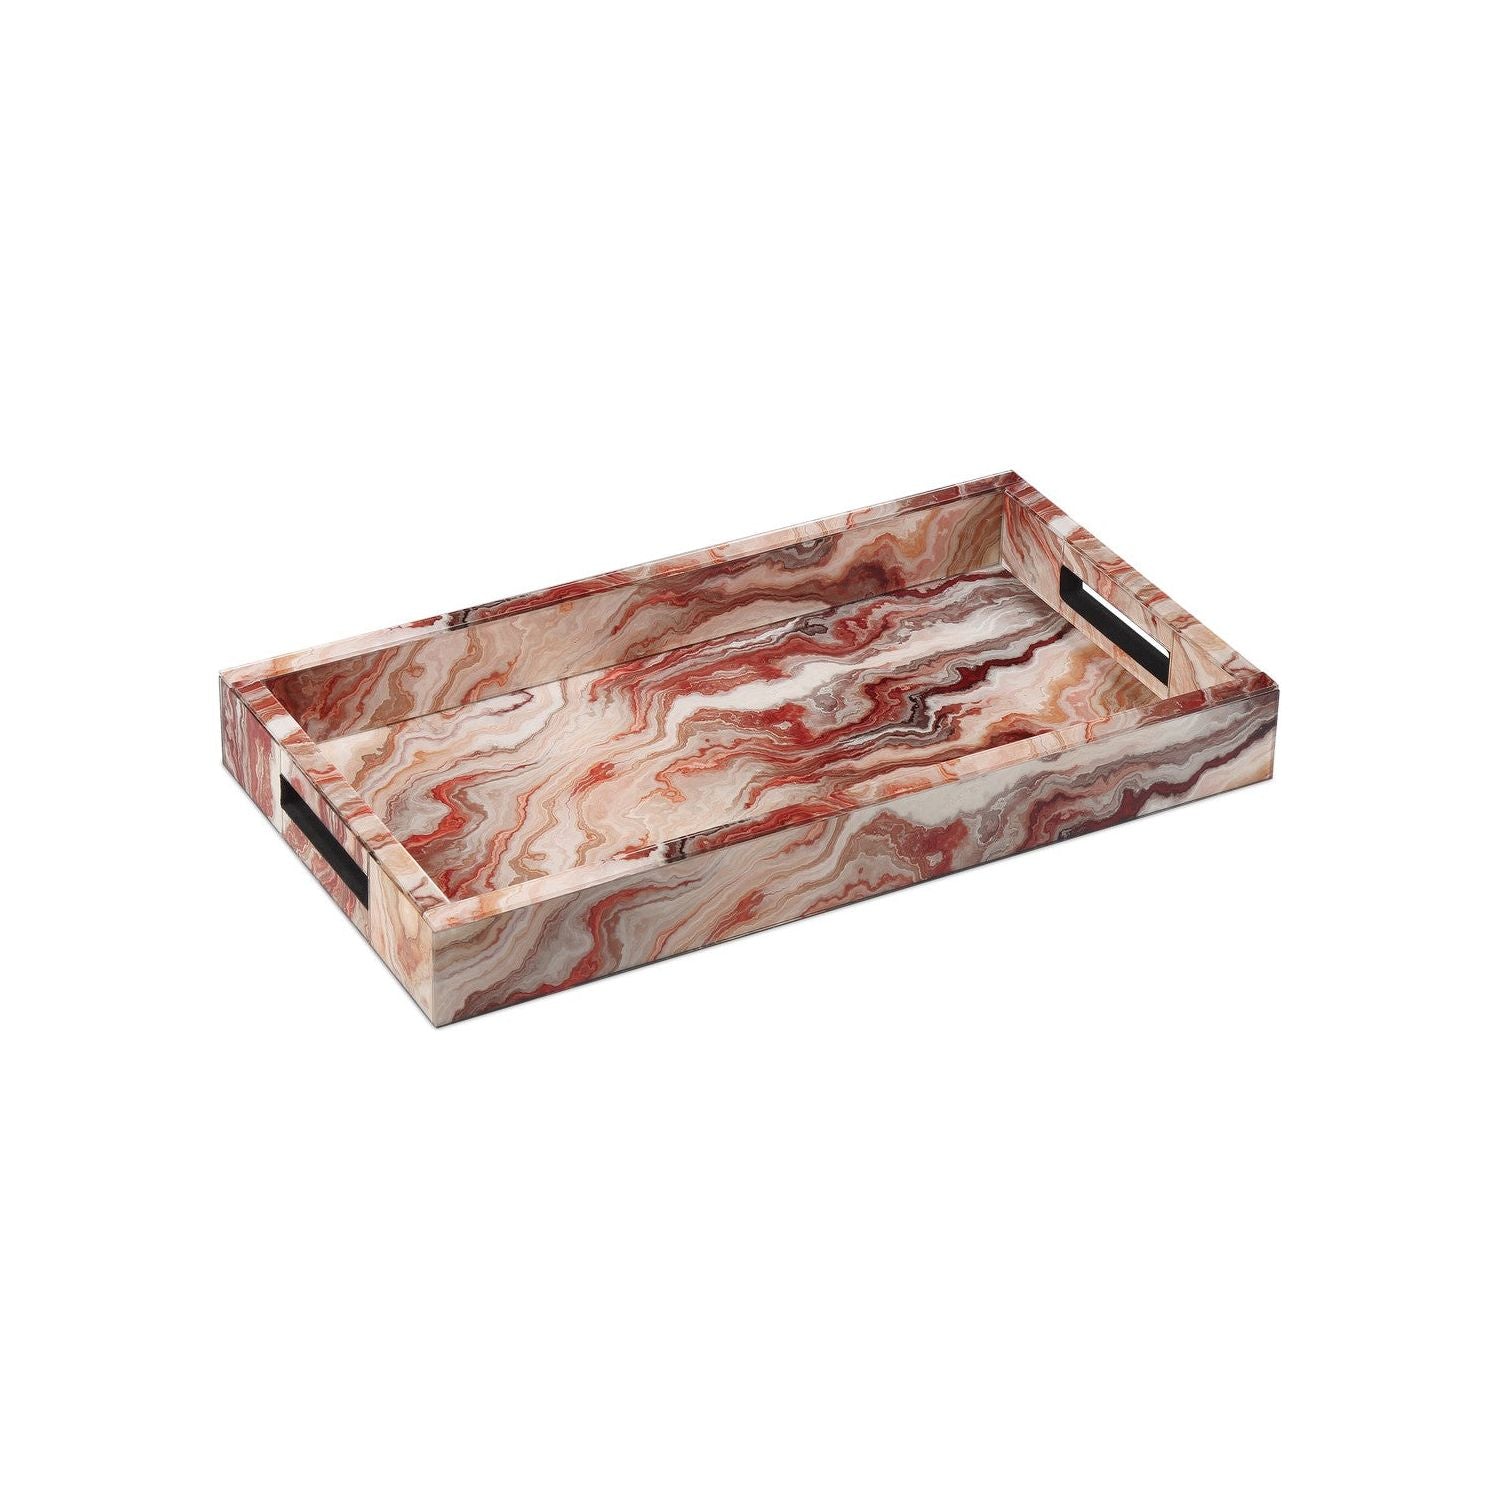 Currey and Company - 1200-0857 - Tray - Red Swirl